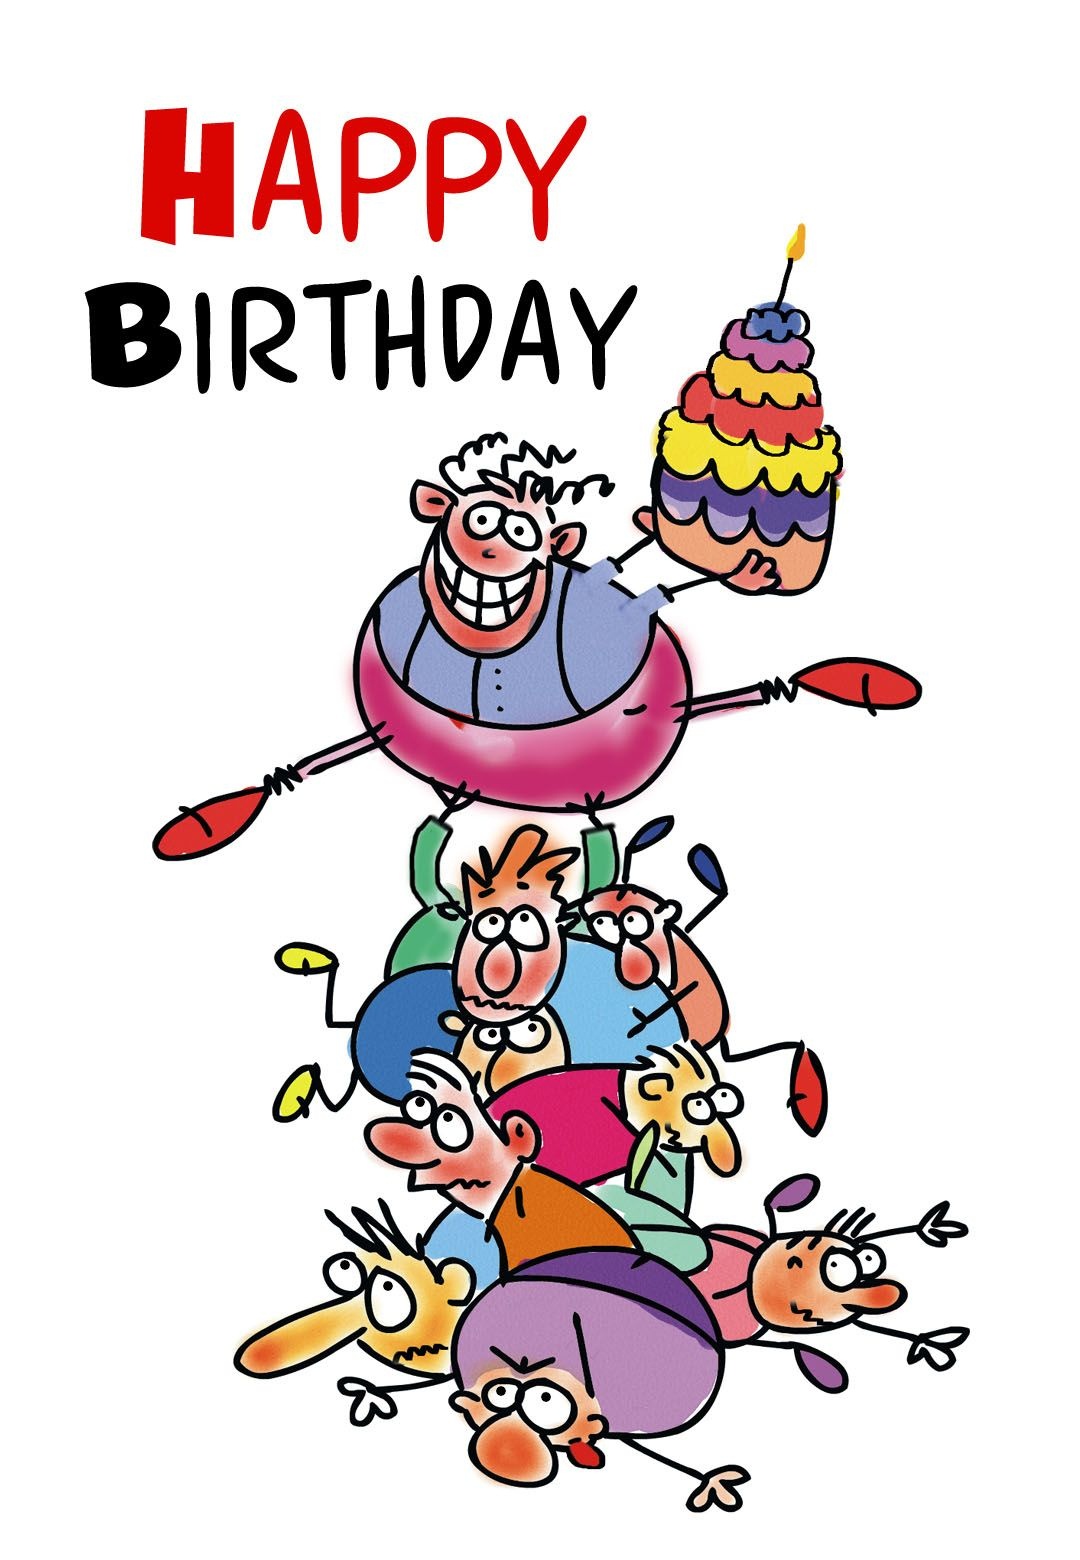 Free Printable Funny Birthday Greeting Card | Gifts To Make | Free - Free Printable Funny Birthday Cards For Adults